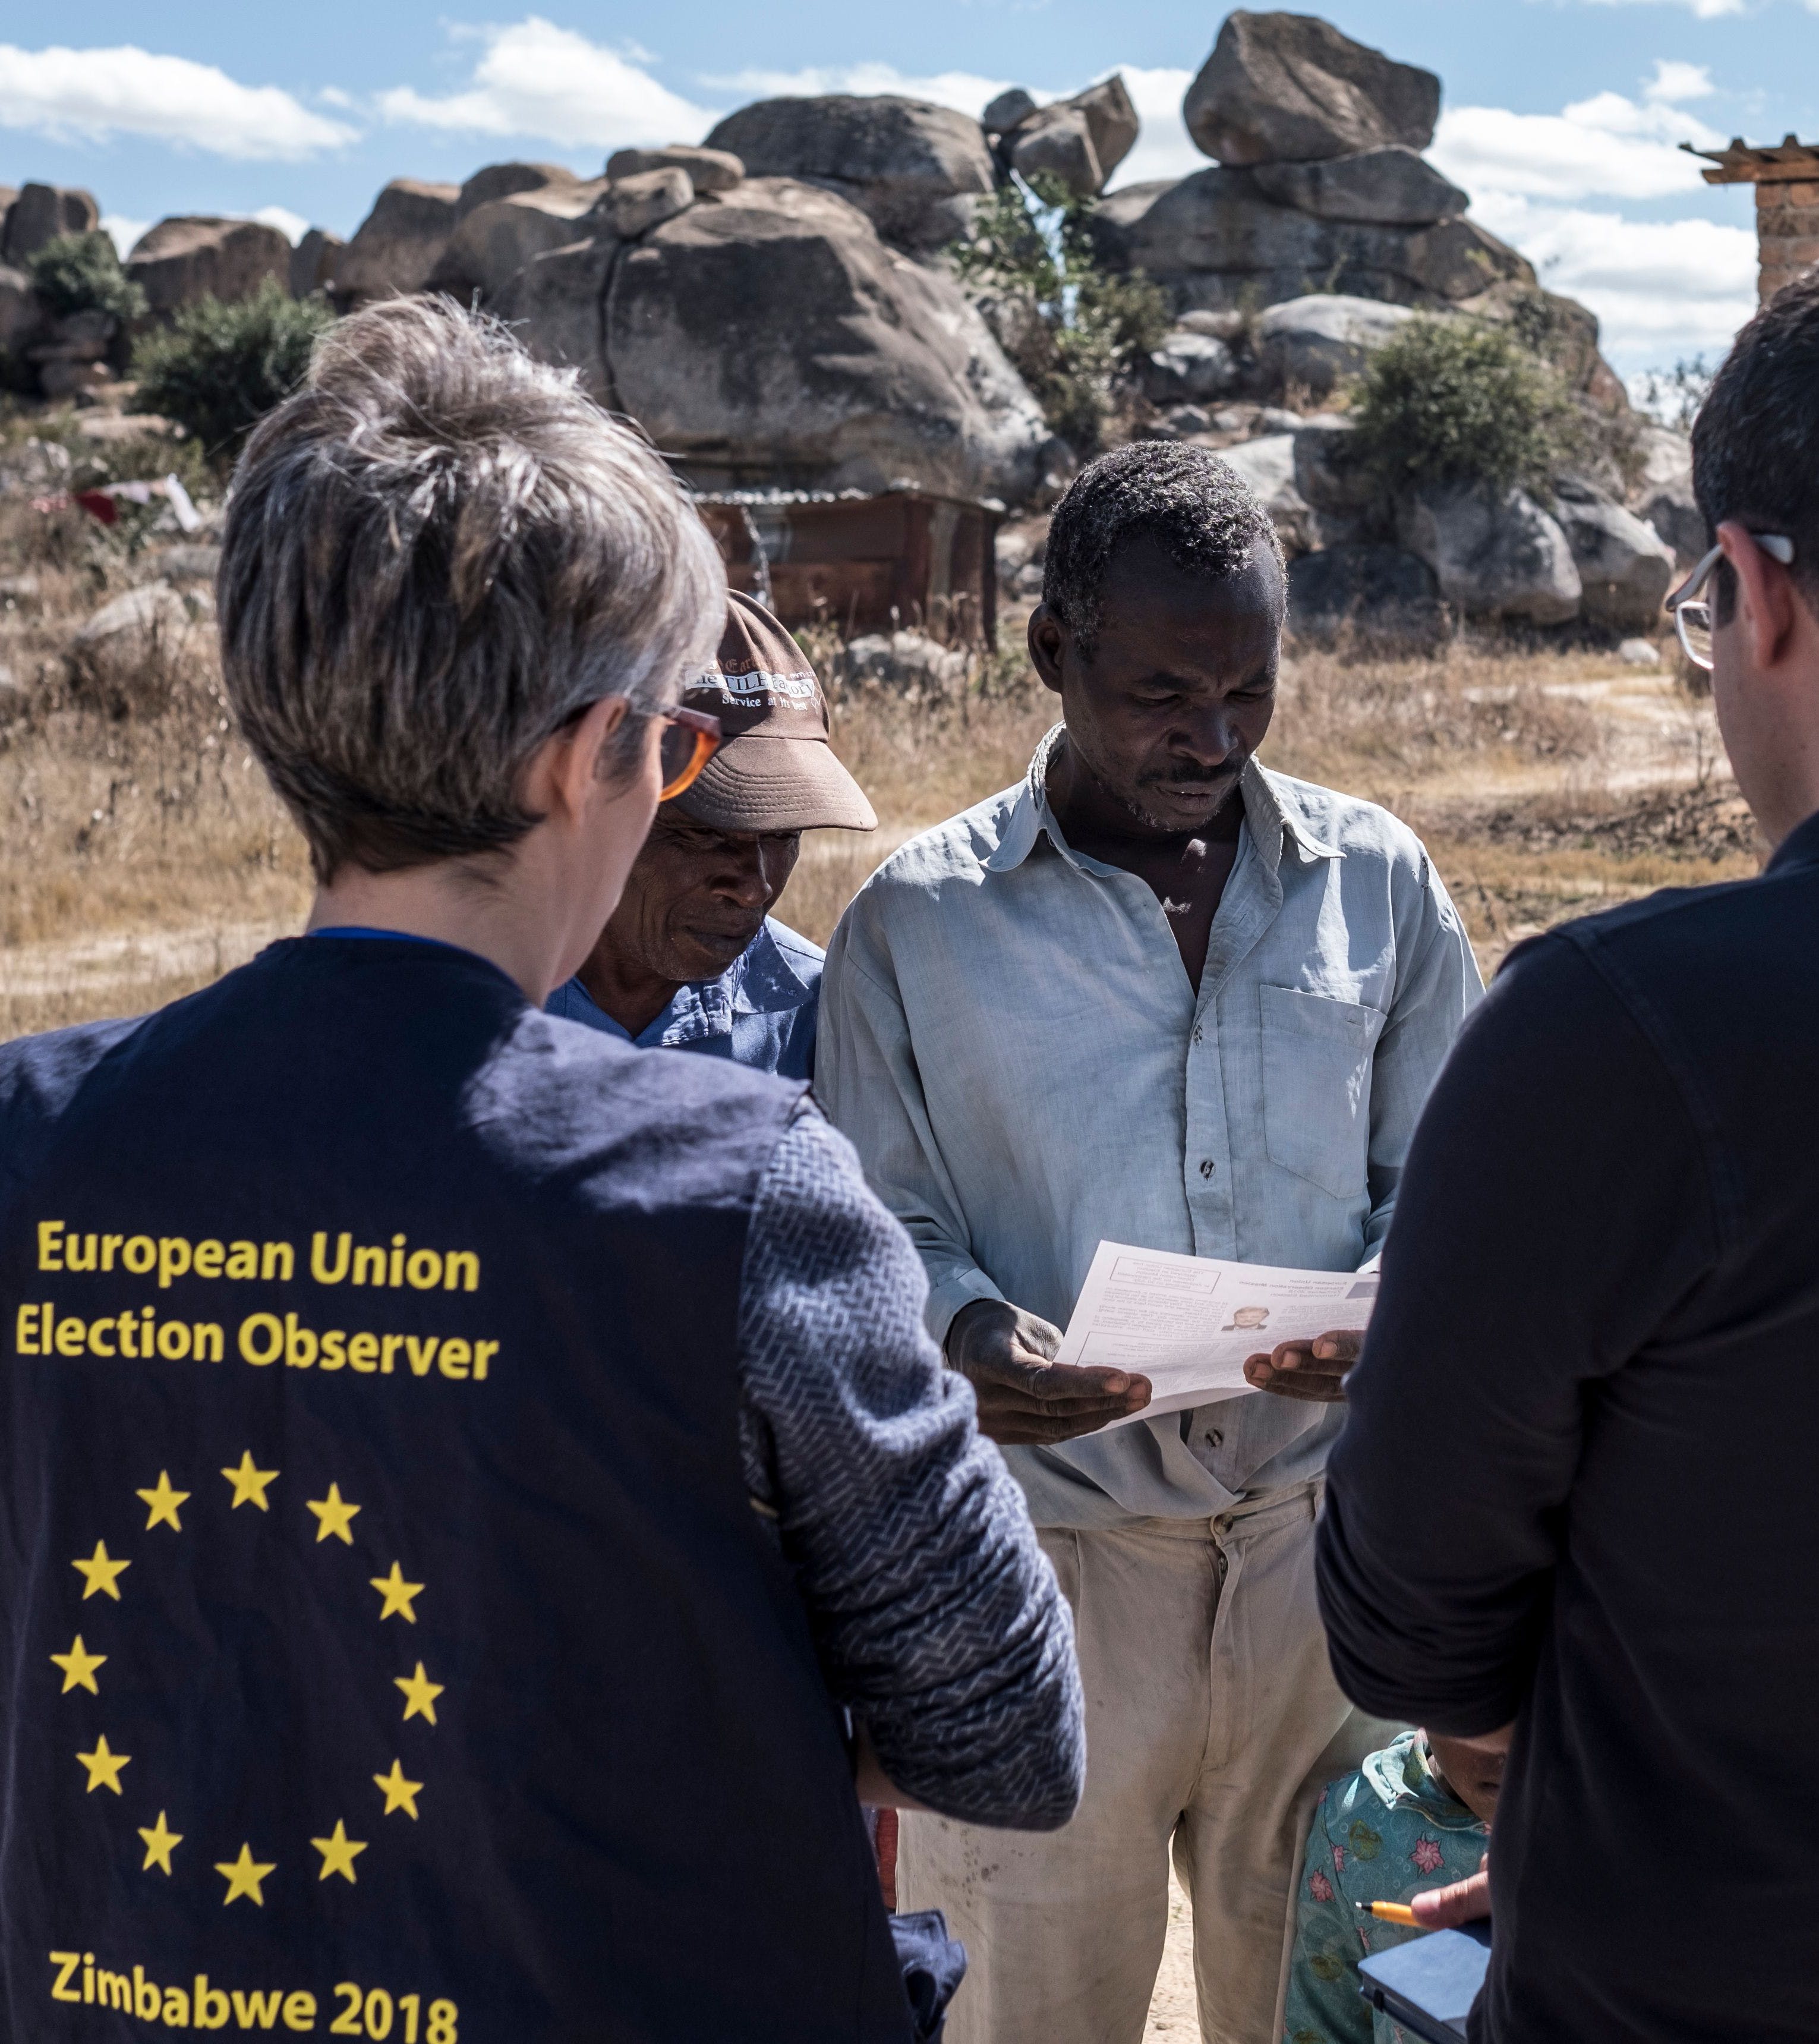 Members of a European Union election observation team speak to voters in Nyatsime, on July 24, 2018. - EU observers have been invited back into the country by the Zimbabwean Government for the first time after a key observer was expelled during the disputed 2002 presidential election. Zimbabwe will hold general elections on July 30, 2018. (Photo by MARCO LONGARI / AFP) (Photo credit should read MARCO LONGARI/AFP/Getty Images)